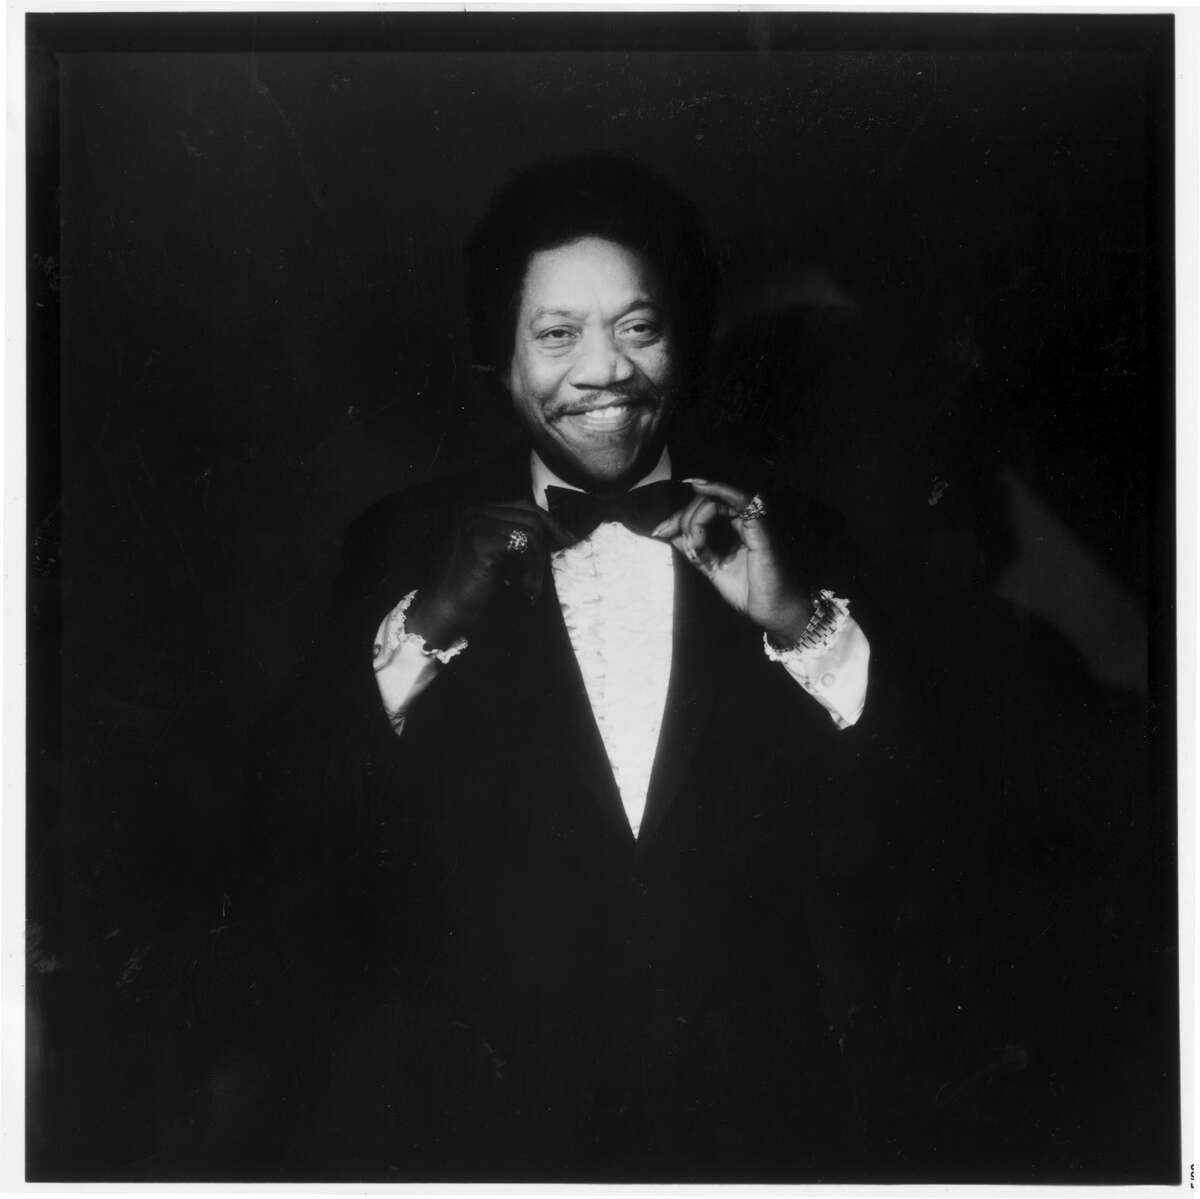 Bobby "Blue" Bland had many ties to Houston. His record label, booking agency, songwriters and musicians were all connected to the city, and Bland became a star here.